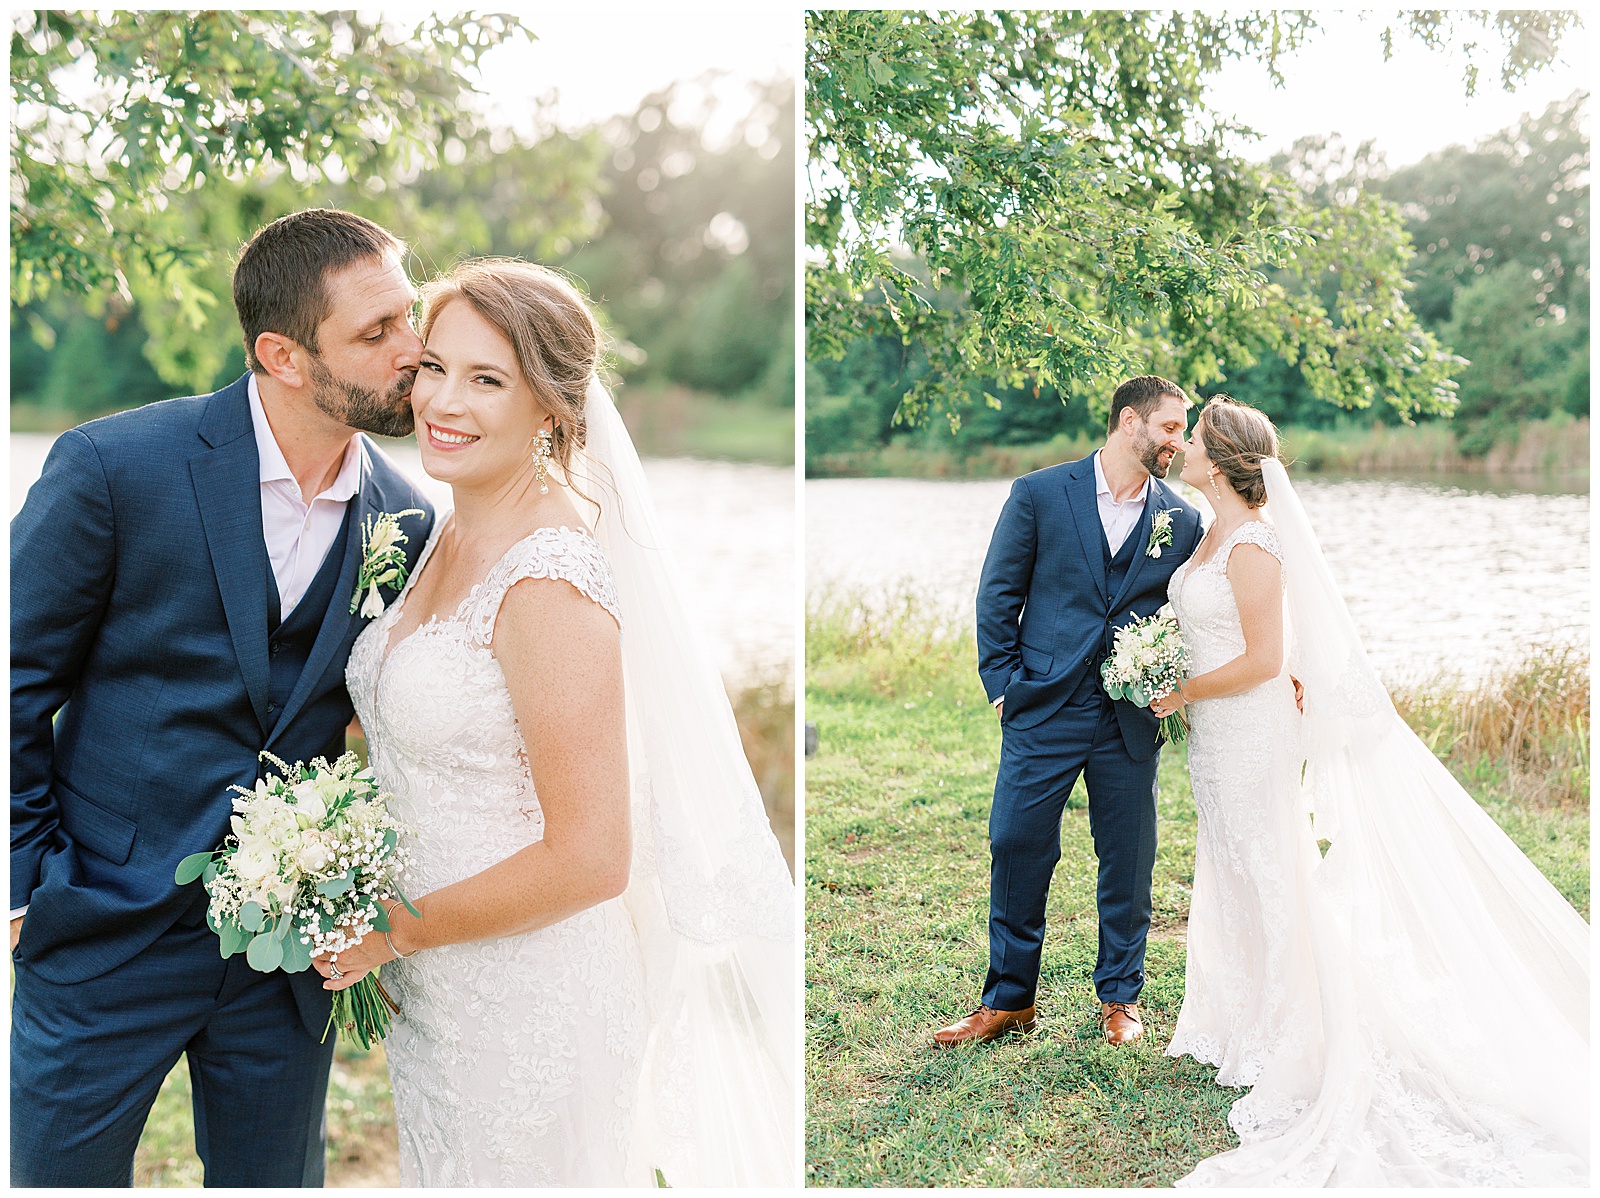 stunning cathedral veil blond haired bride and navy blue suit groom in outdoor summer wedding portraits